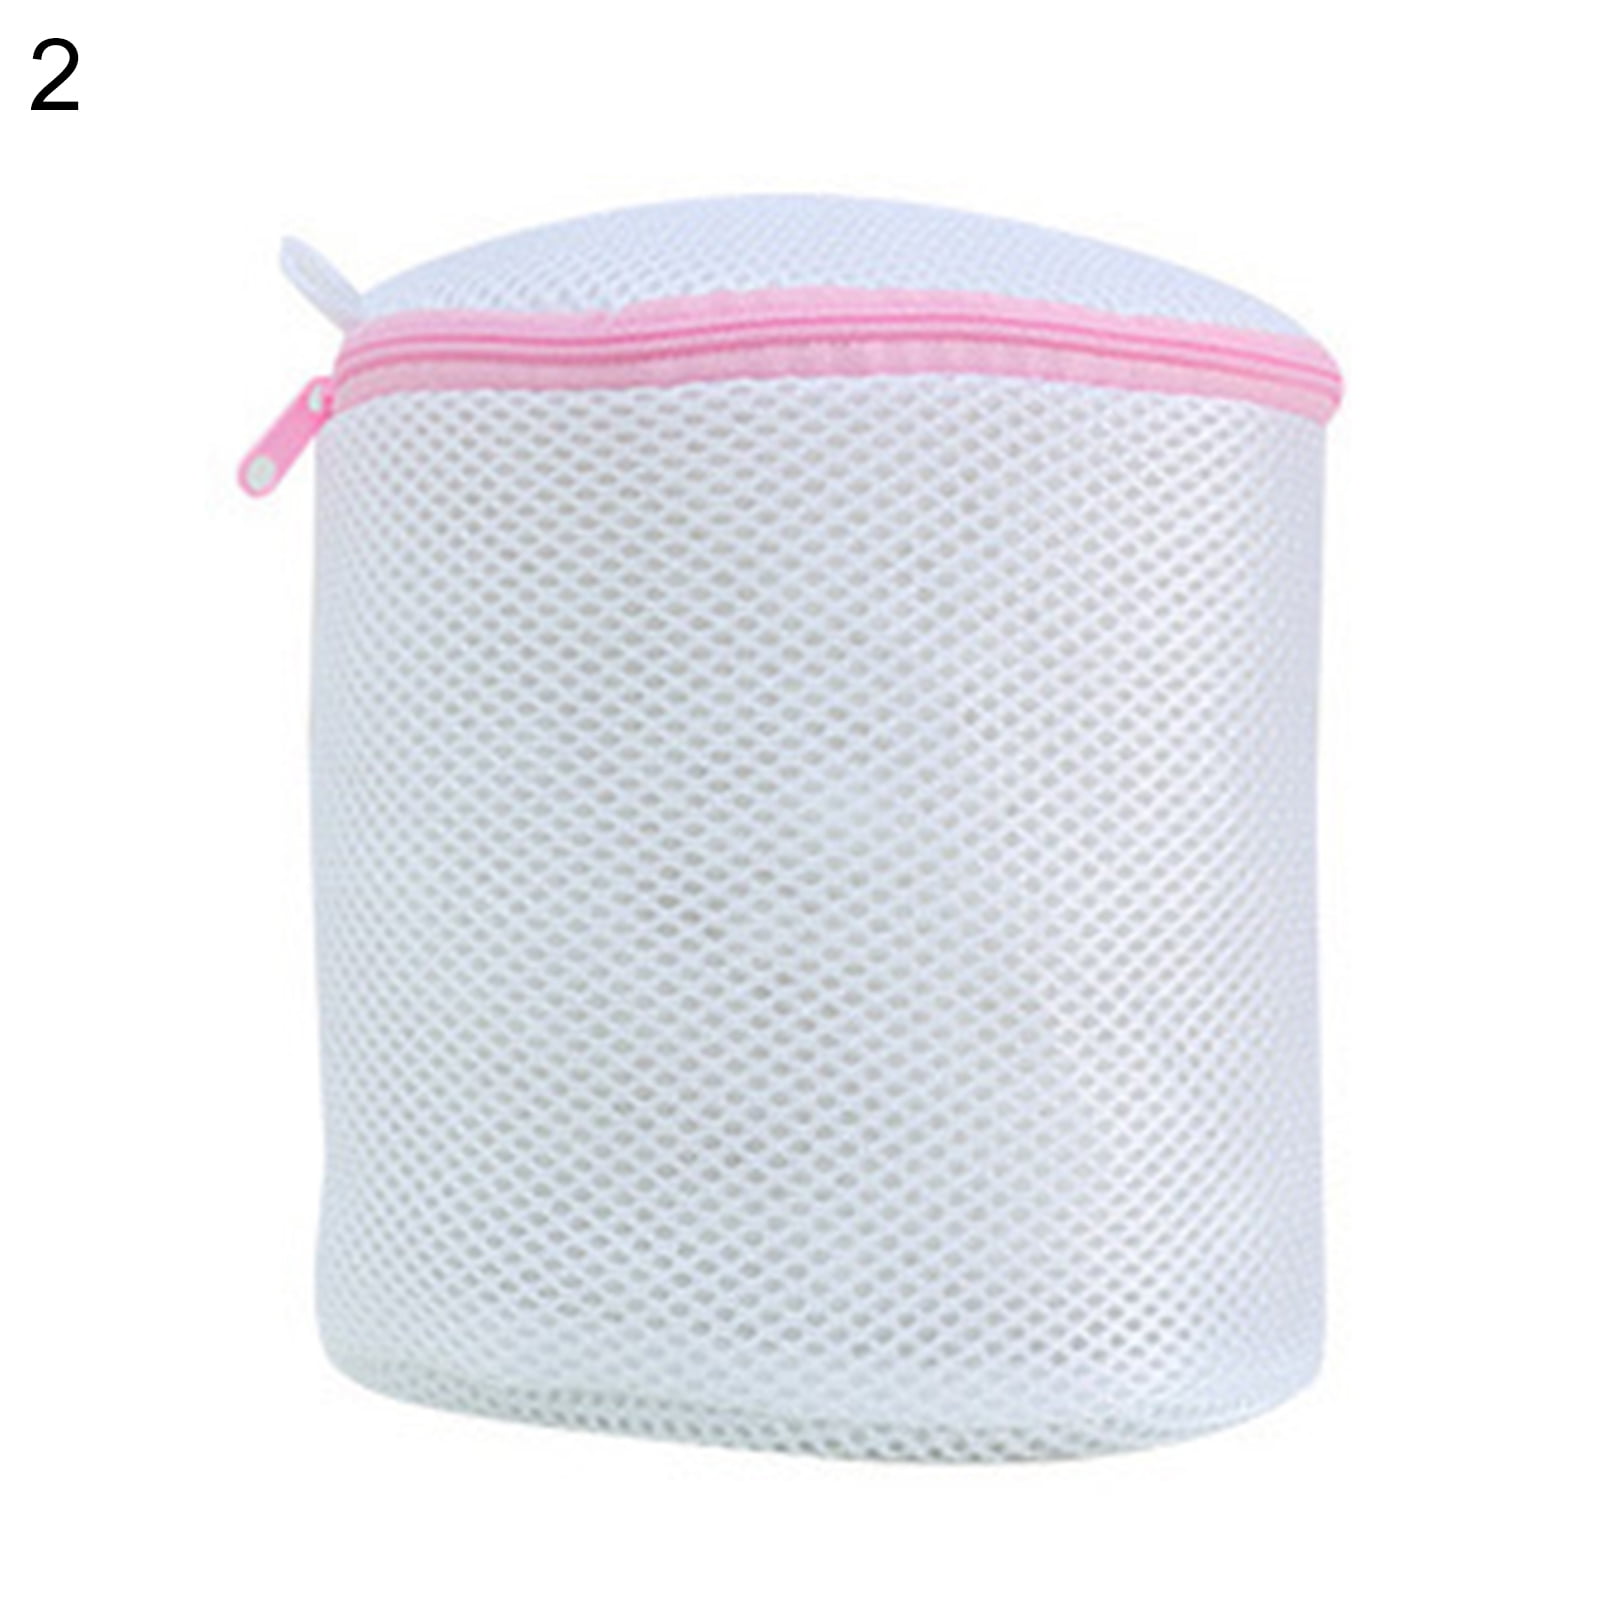 High quality Underwear Socks Sweater Thicken Large Small mesh Laundry Bags Wash 